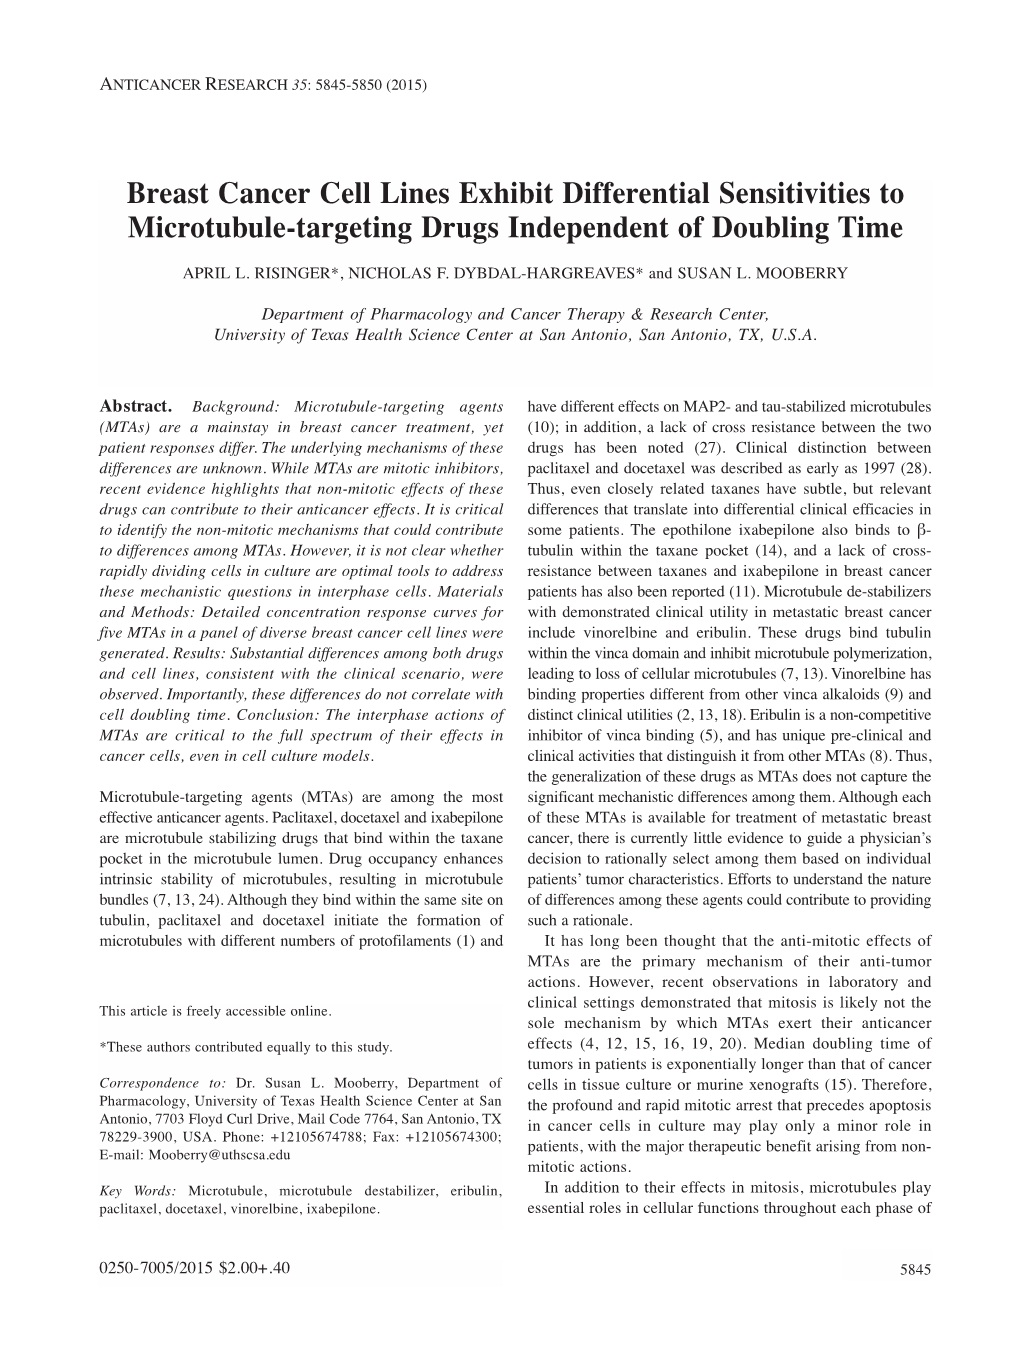 Breast Cancer Cell Lines Exhibit Differential Sensitivities to Microtubule-Targeting Drugs Independent of Doubling Time